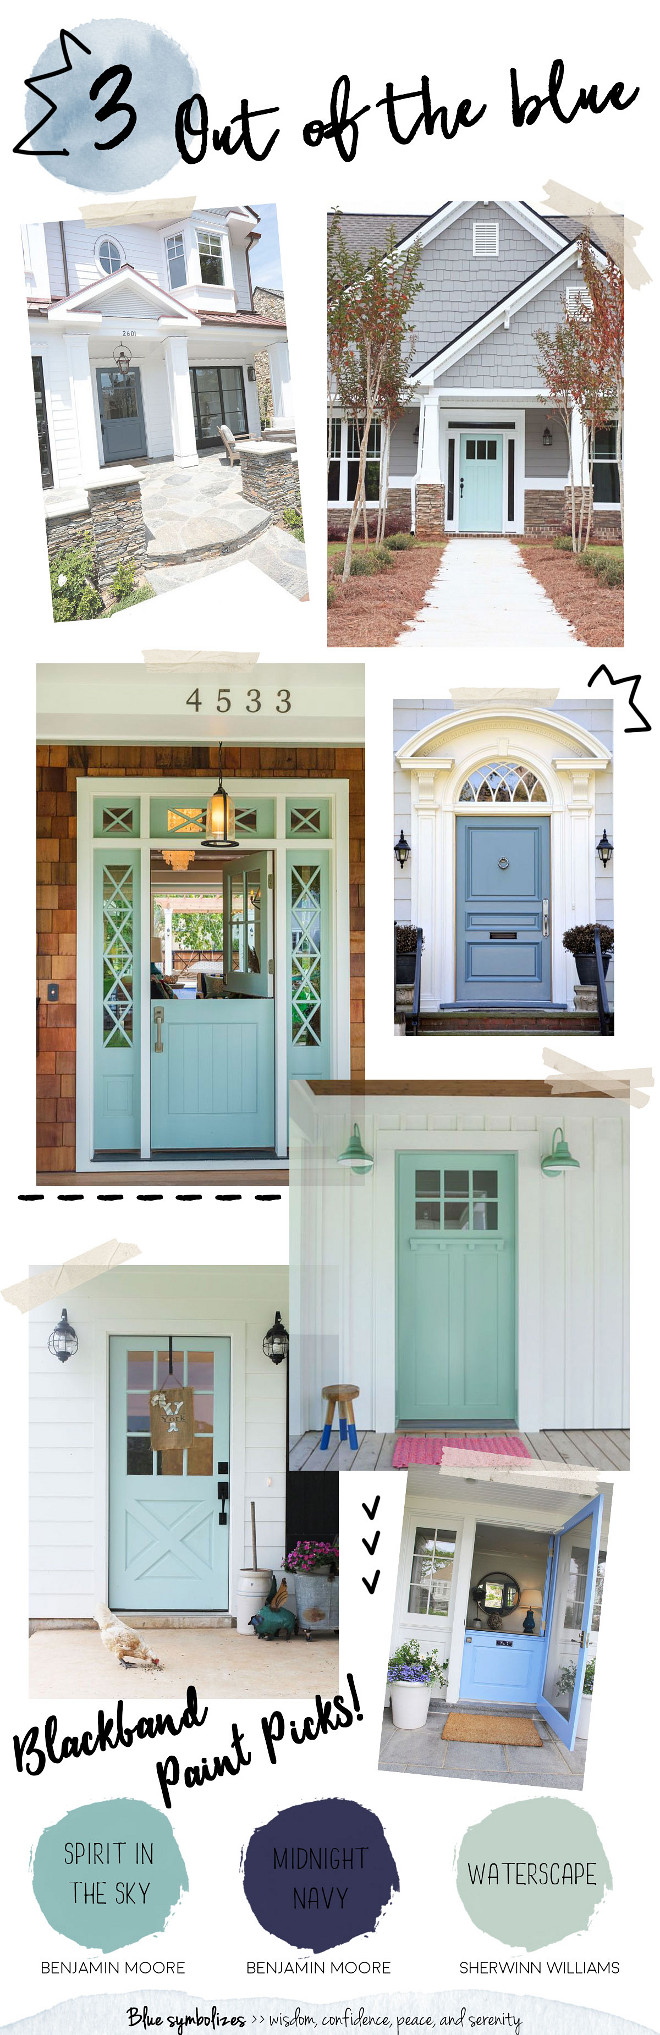 Blue Front Door Paint Colors. Benjamin Moore Spirit in the Sky by Benjamin Moore. Midnight Navy by Benjamin Moore. Waterscape by Sherwin Williams. Blue is strongly associated with tranquility and calmness, suggesting a serene retreat behind closed doors. #blue #frontdoor #paintcolor #BenjaminMooreSpiritintheSky #MidnightNavybyBenjaminMoore #WaterscapebySherwinWilliams Graystone Custom Builders. Blackband Design